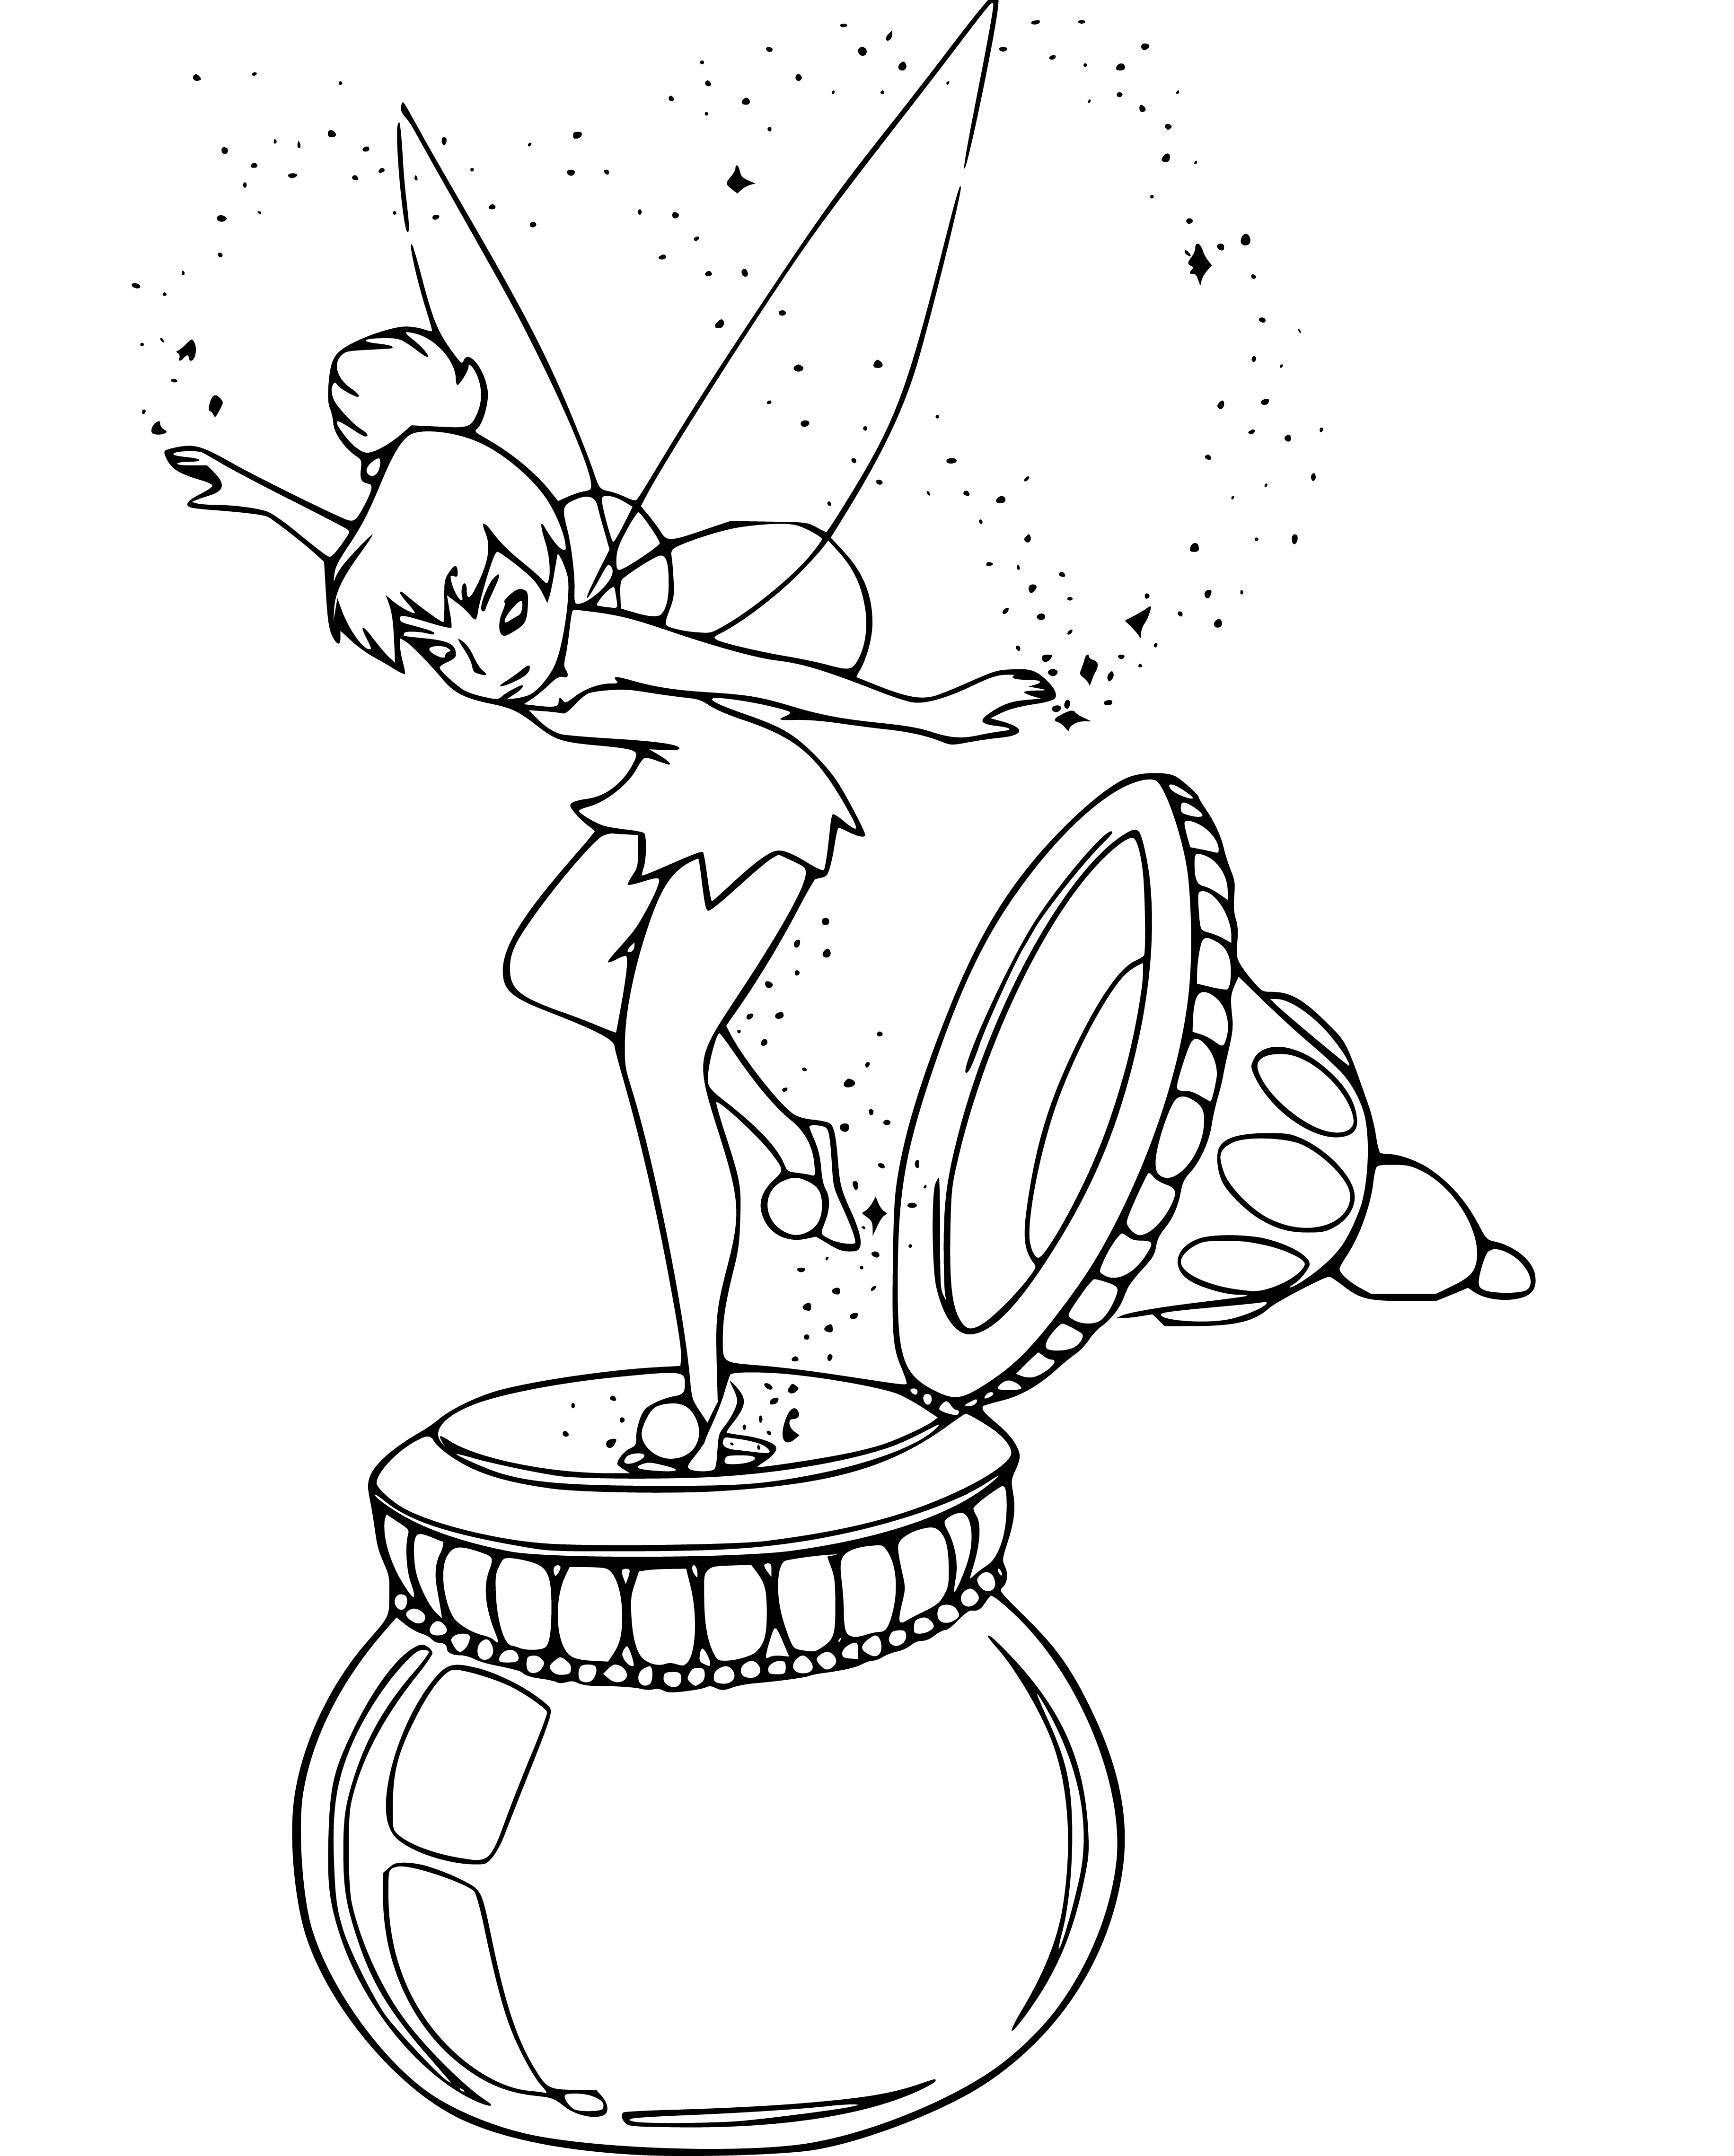 Tinker Bell Coloring Page for Kids to Print - SheetalColor.com